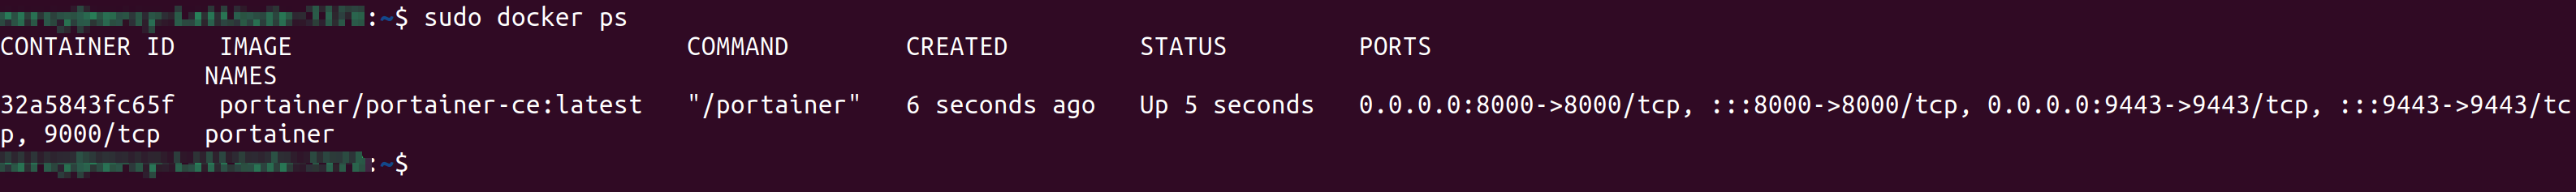 Confirming portainer is up and running.